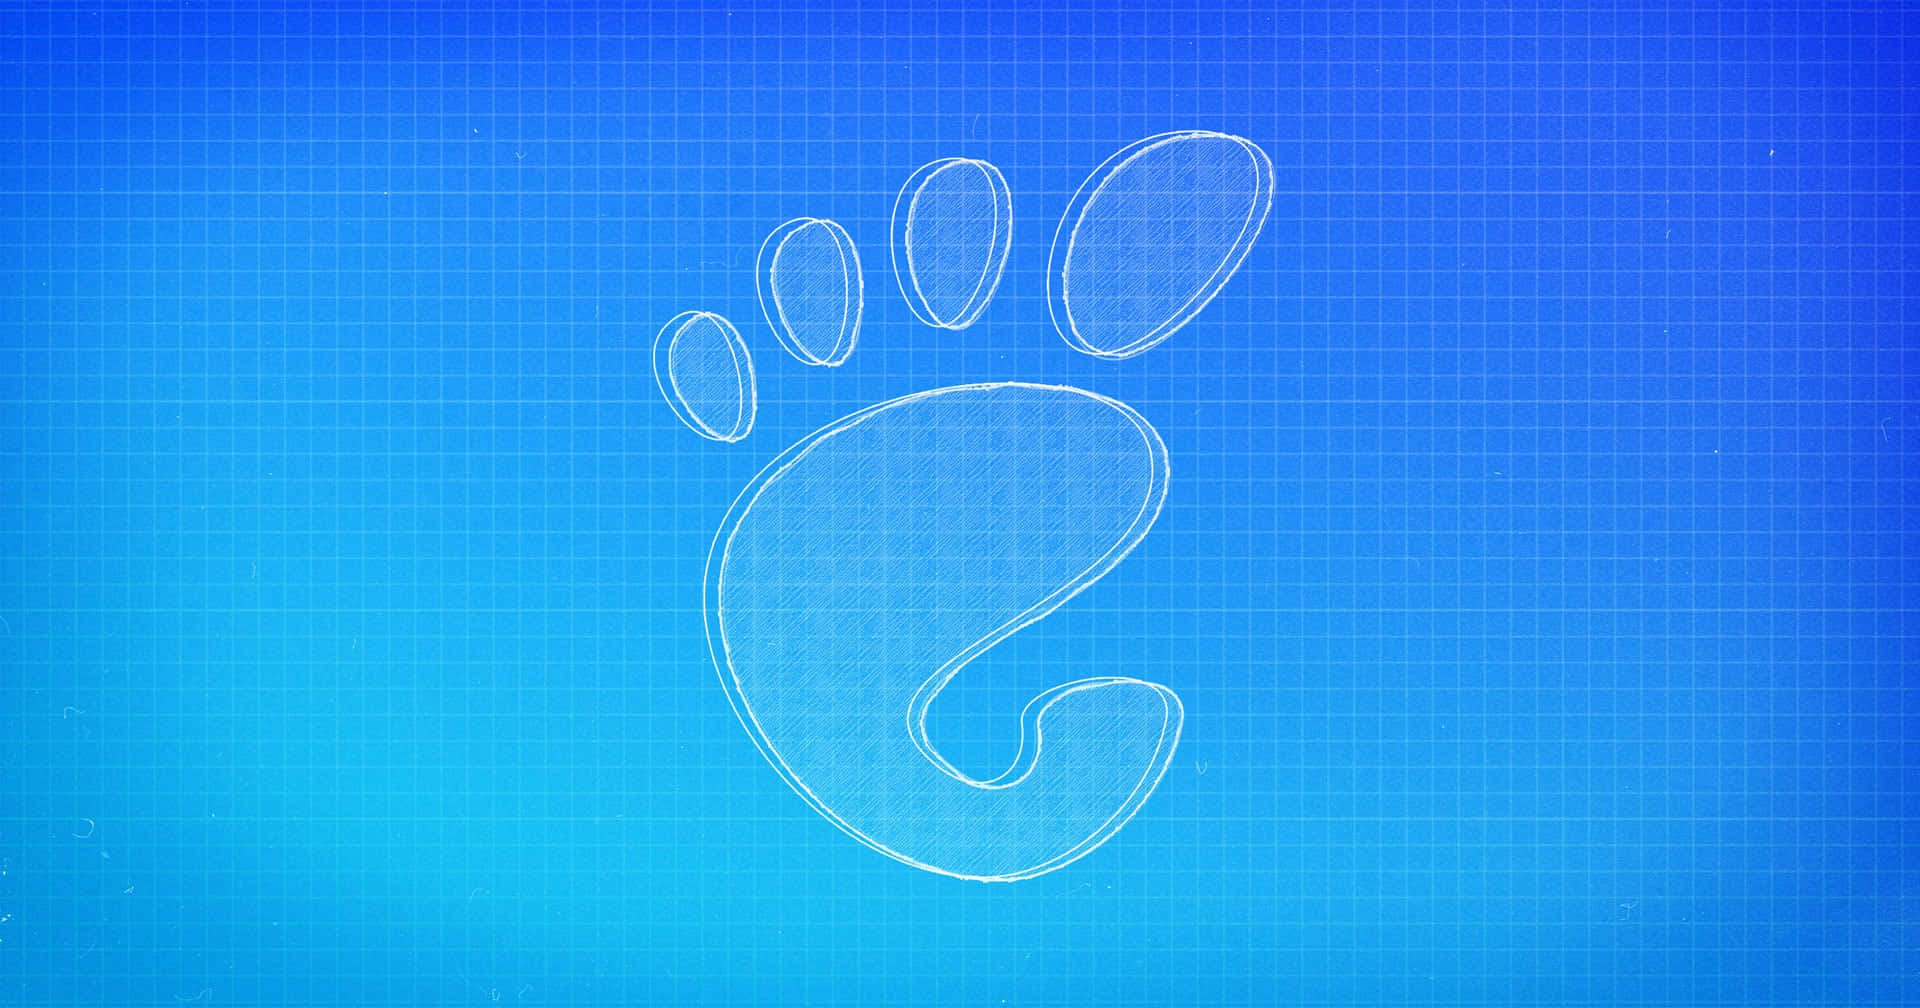 A Blue Background With A Foot Print On It